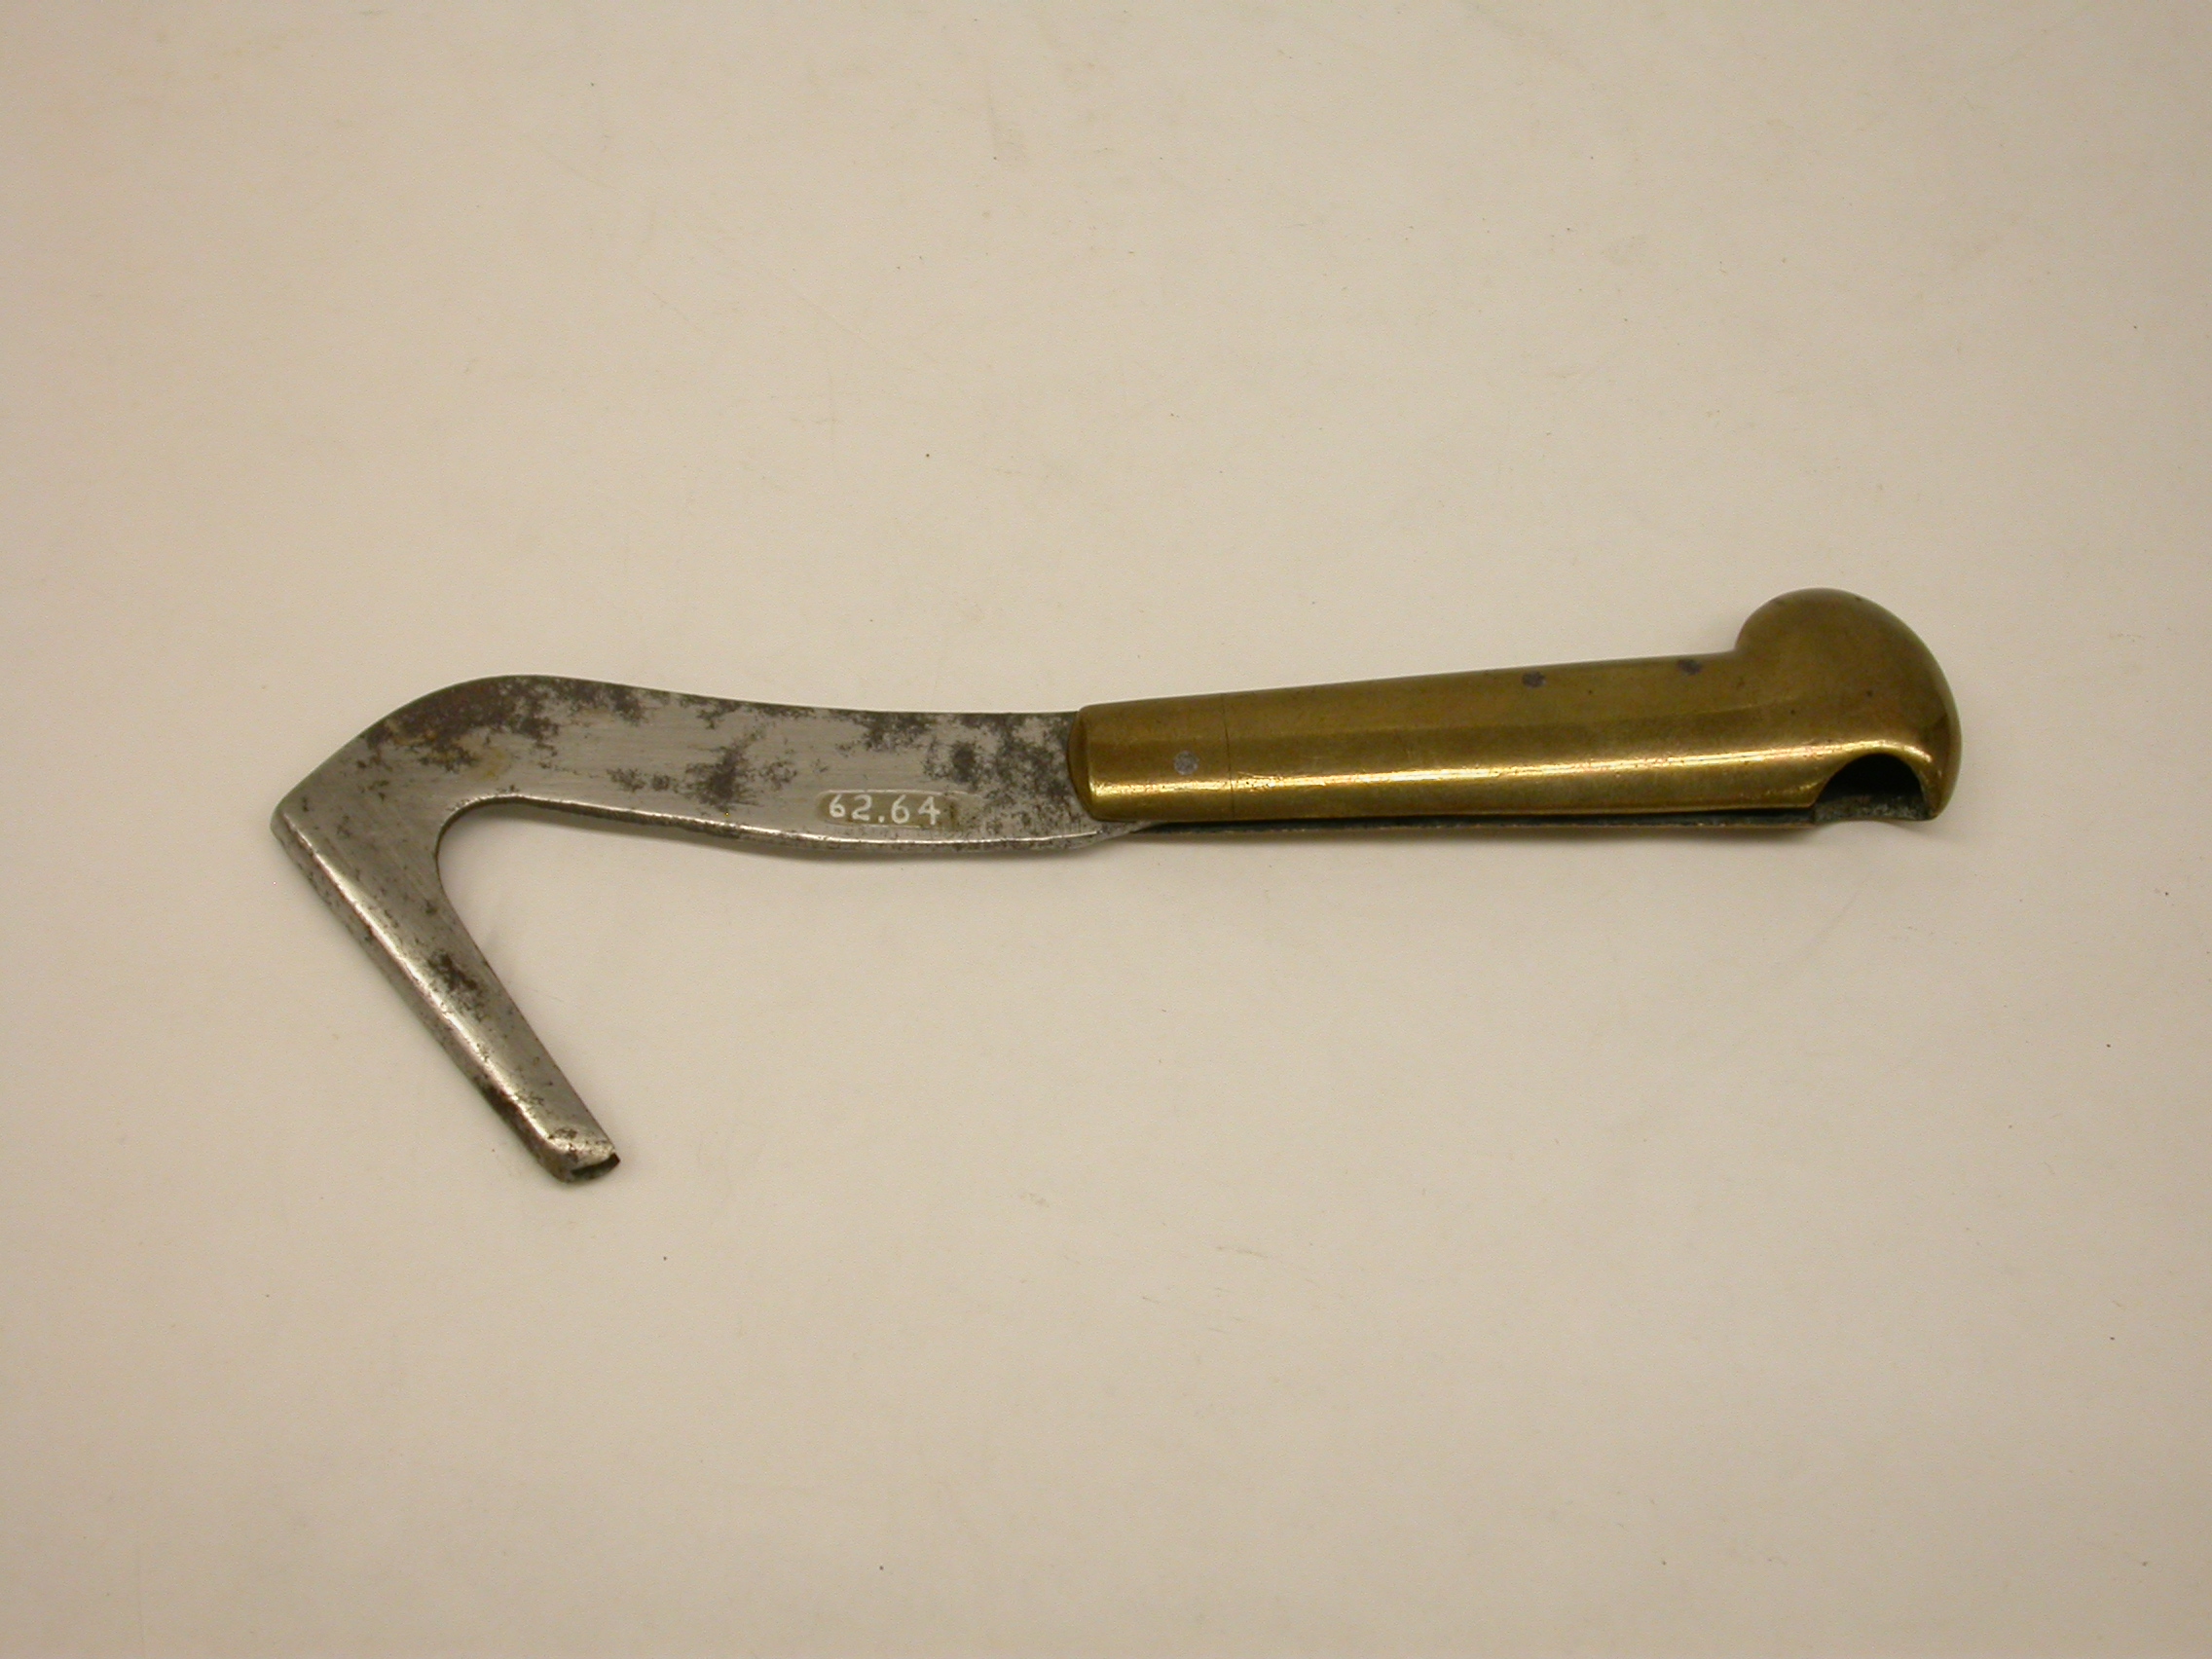 a%20steel%20timber%20scribe%20with%20a%20hollow%20brass%20handle